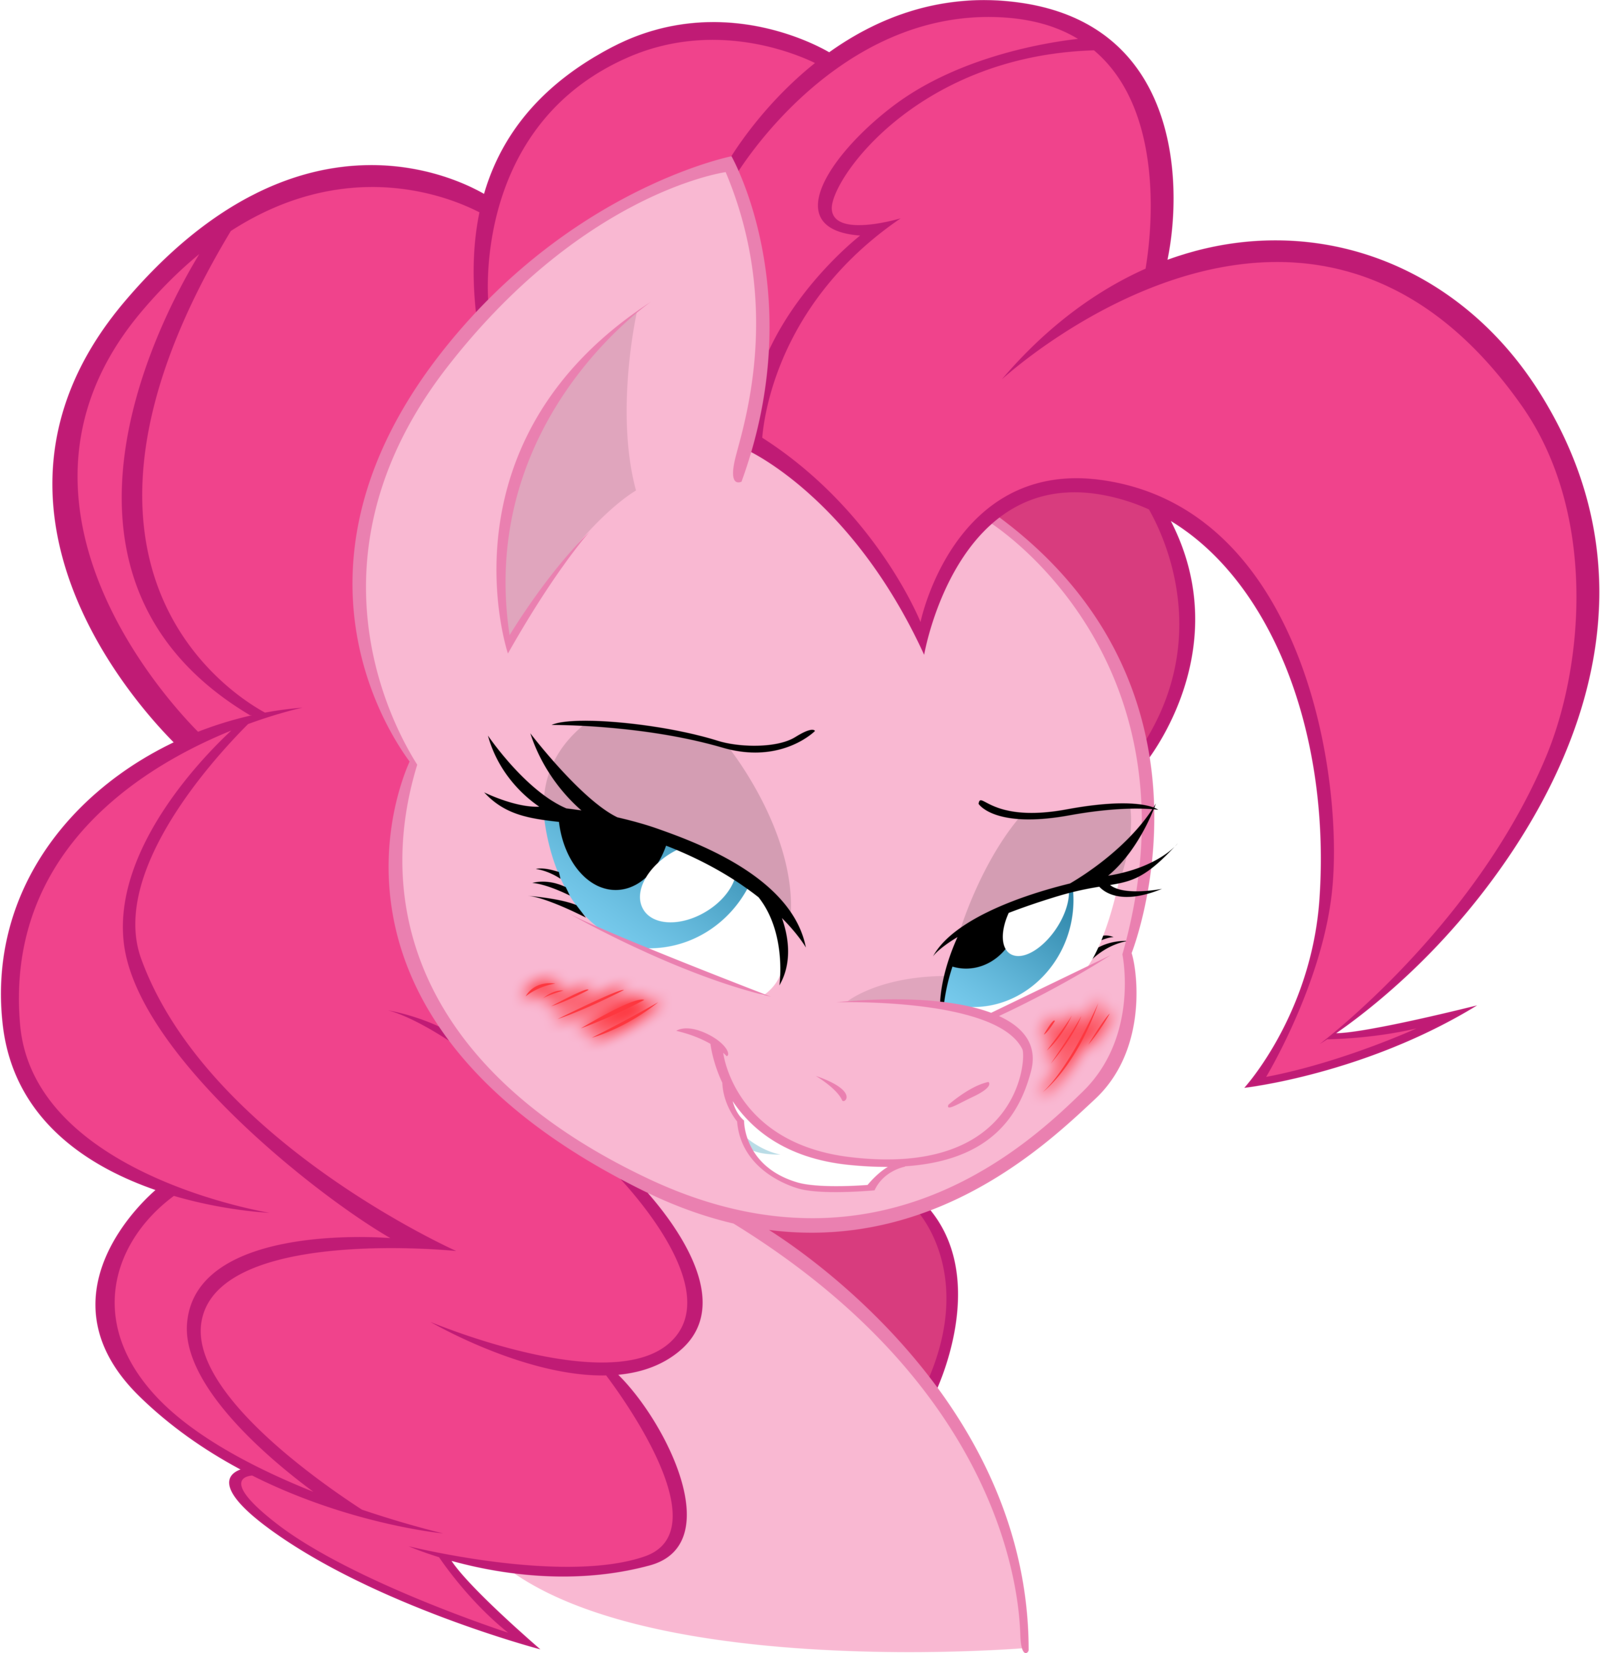 pinkie_pie___oh_you____by_alex4nder02-d5